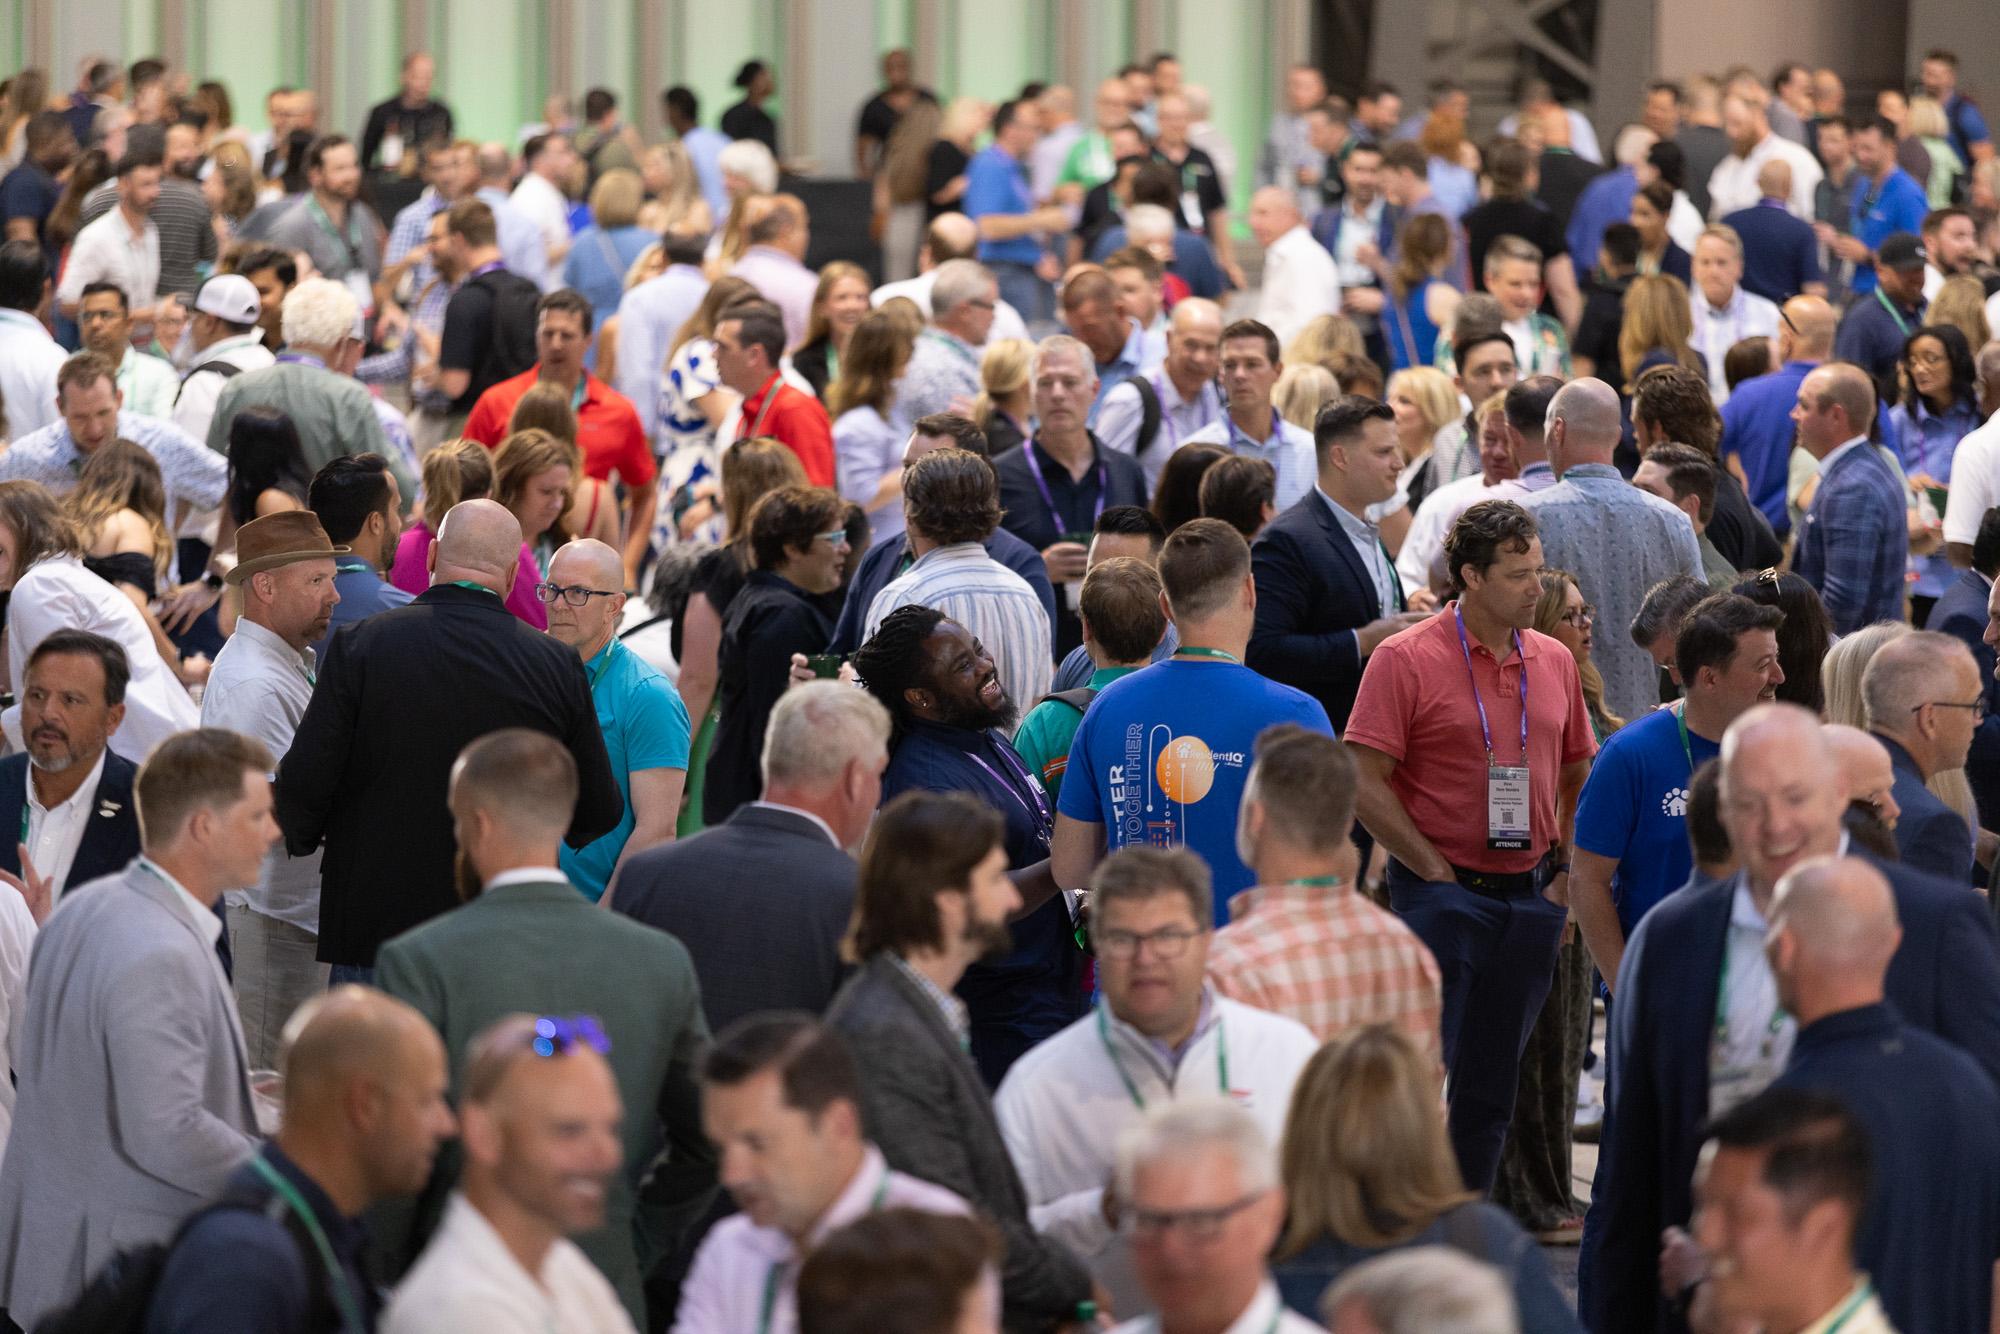 With more than 12,000 attendees, NAA’s Apartmentalize is the largest, most popular annual event for rental housing professionals.